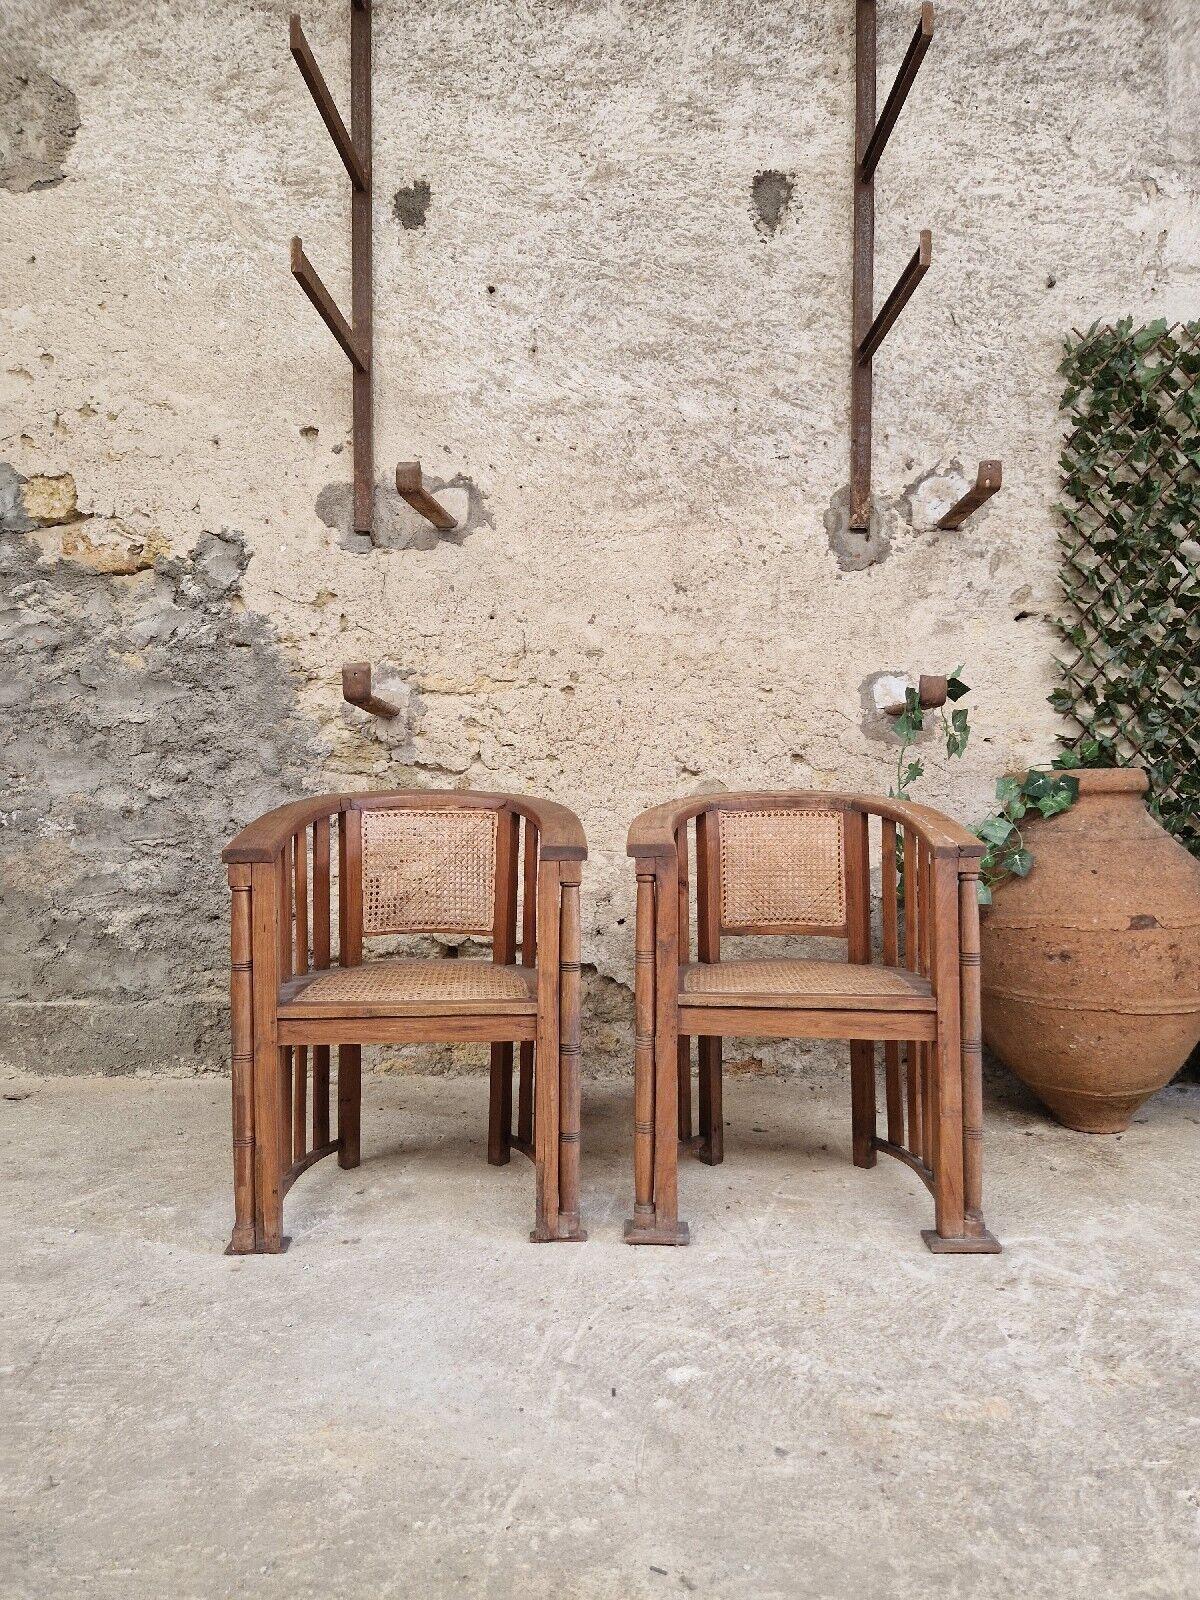 We are delighted to offer for sale this listing for a Fabulous Pair of Joseph Hoffman Barrell Chairs

Joseph Hoffman was a central figure in Modern Design, he was born in the 19th Century in Europe.
He favoured a new emphasis, simplicity of